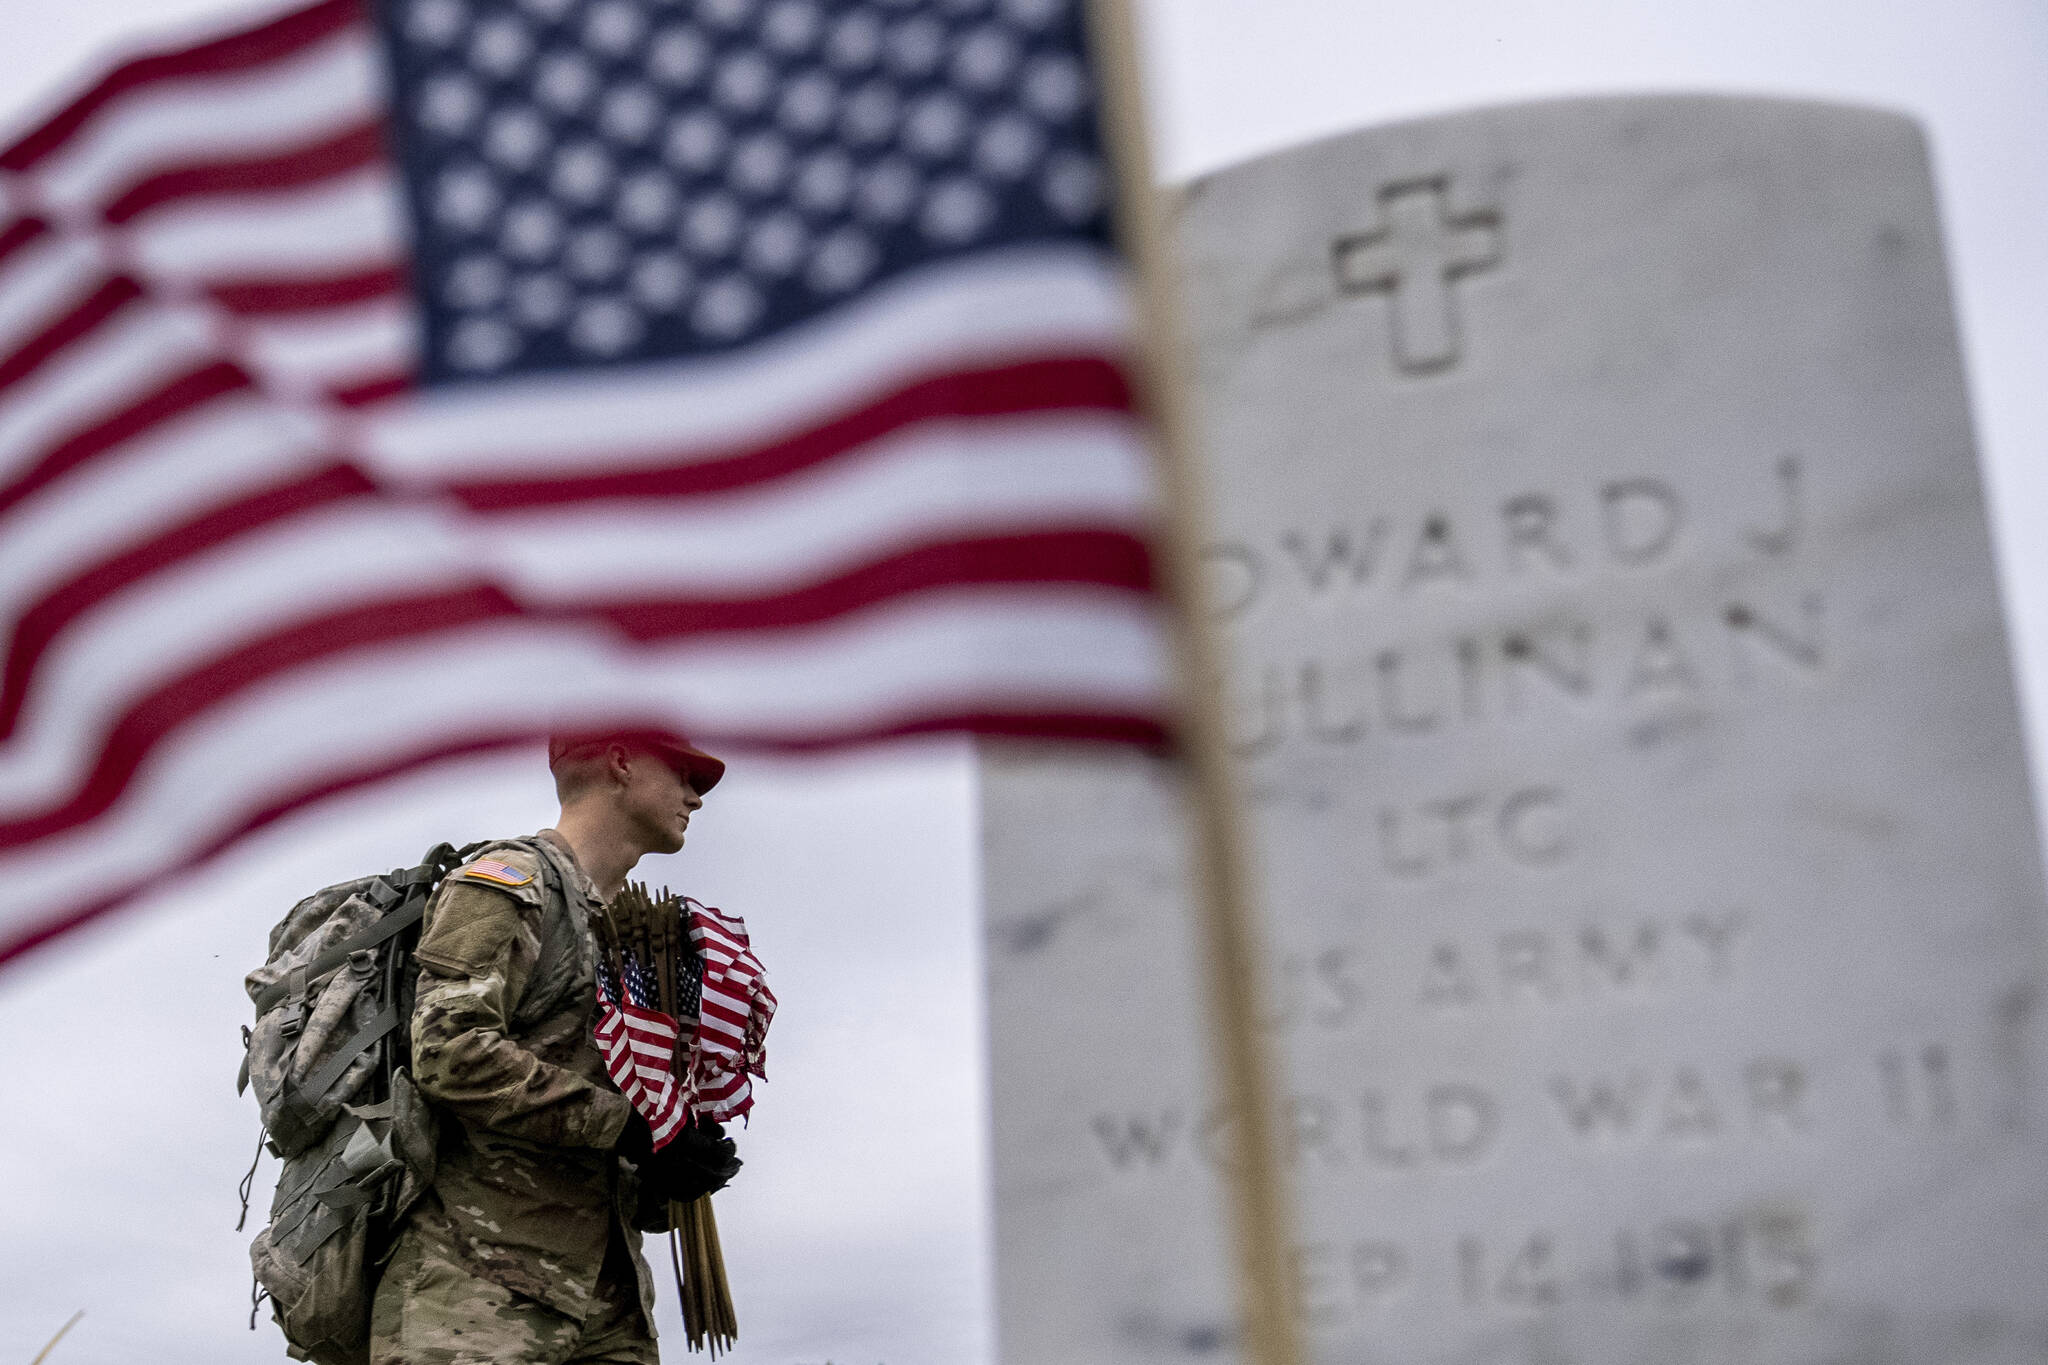 A member of the 3rd U.S. Infantry Regiment, also known as The Old Guard, places flags in front of each headstone for "Flags-In" at Arlington National Cemetery in Arlington, Thursday, May 25, 2023, to honor the Nation's fallen military heroes ahead of Memorial Day. (AP Photo / Andrew Harnik)